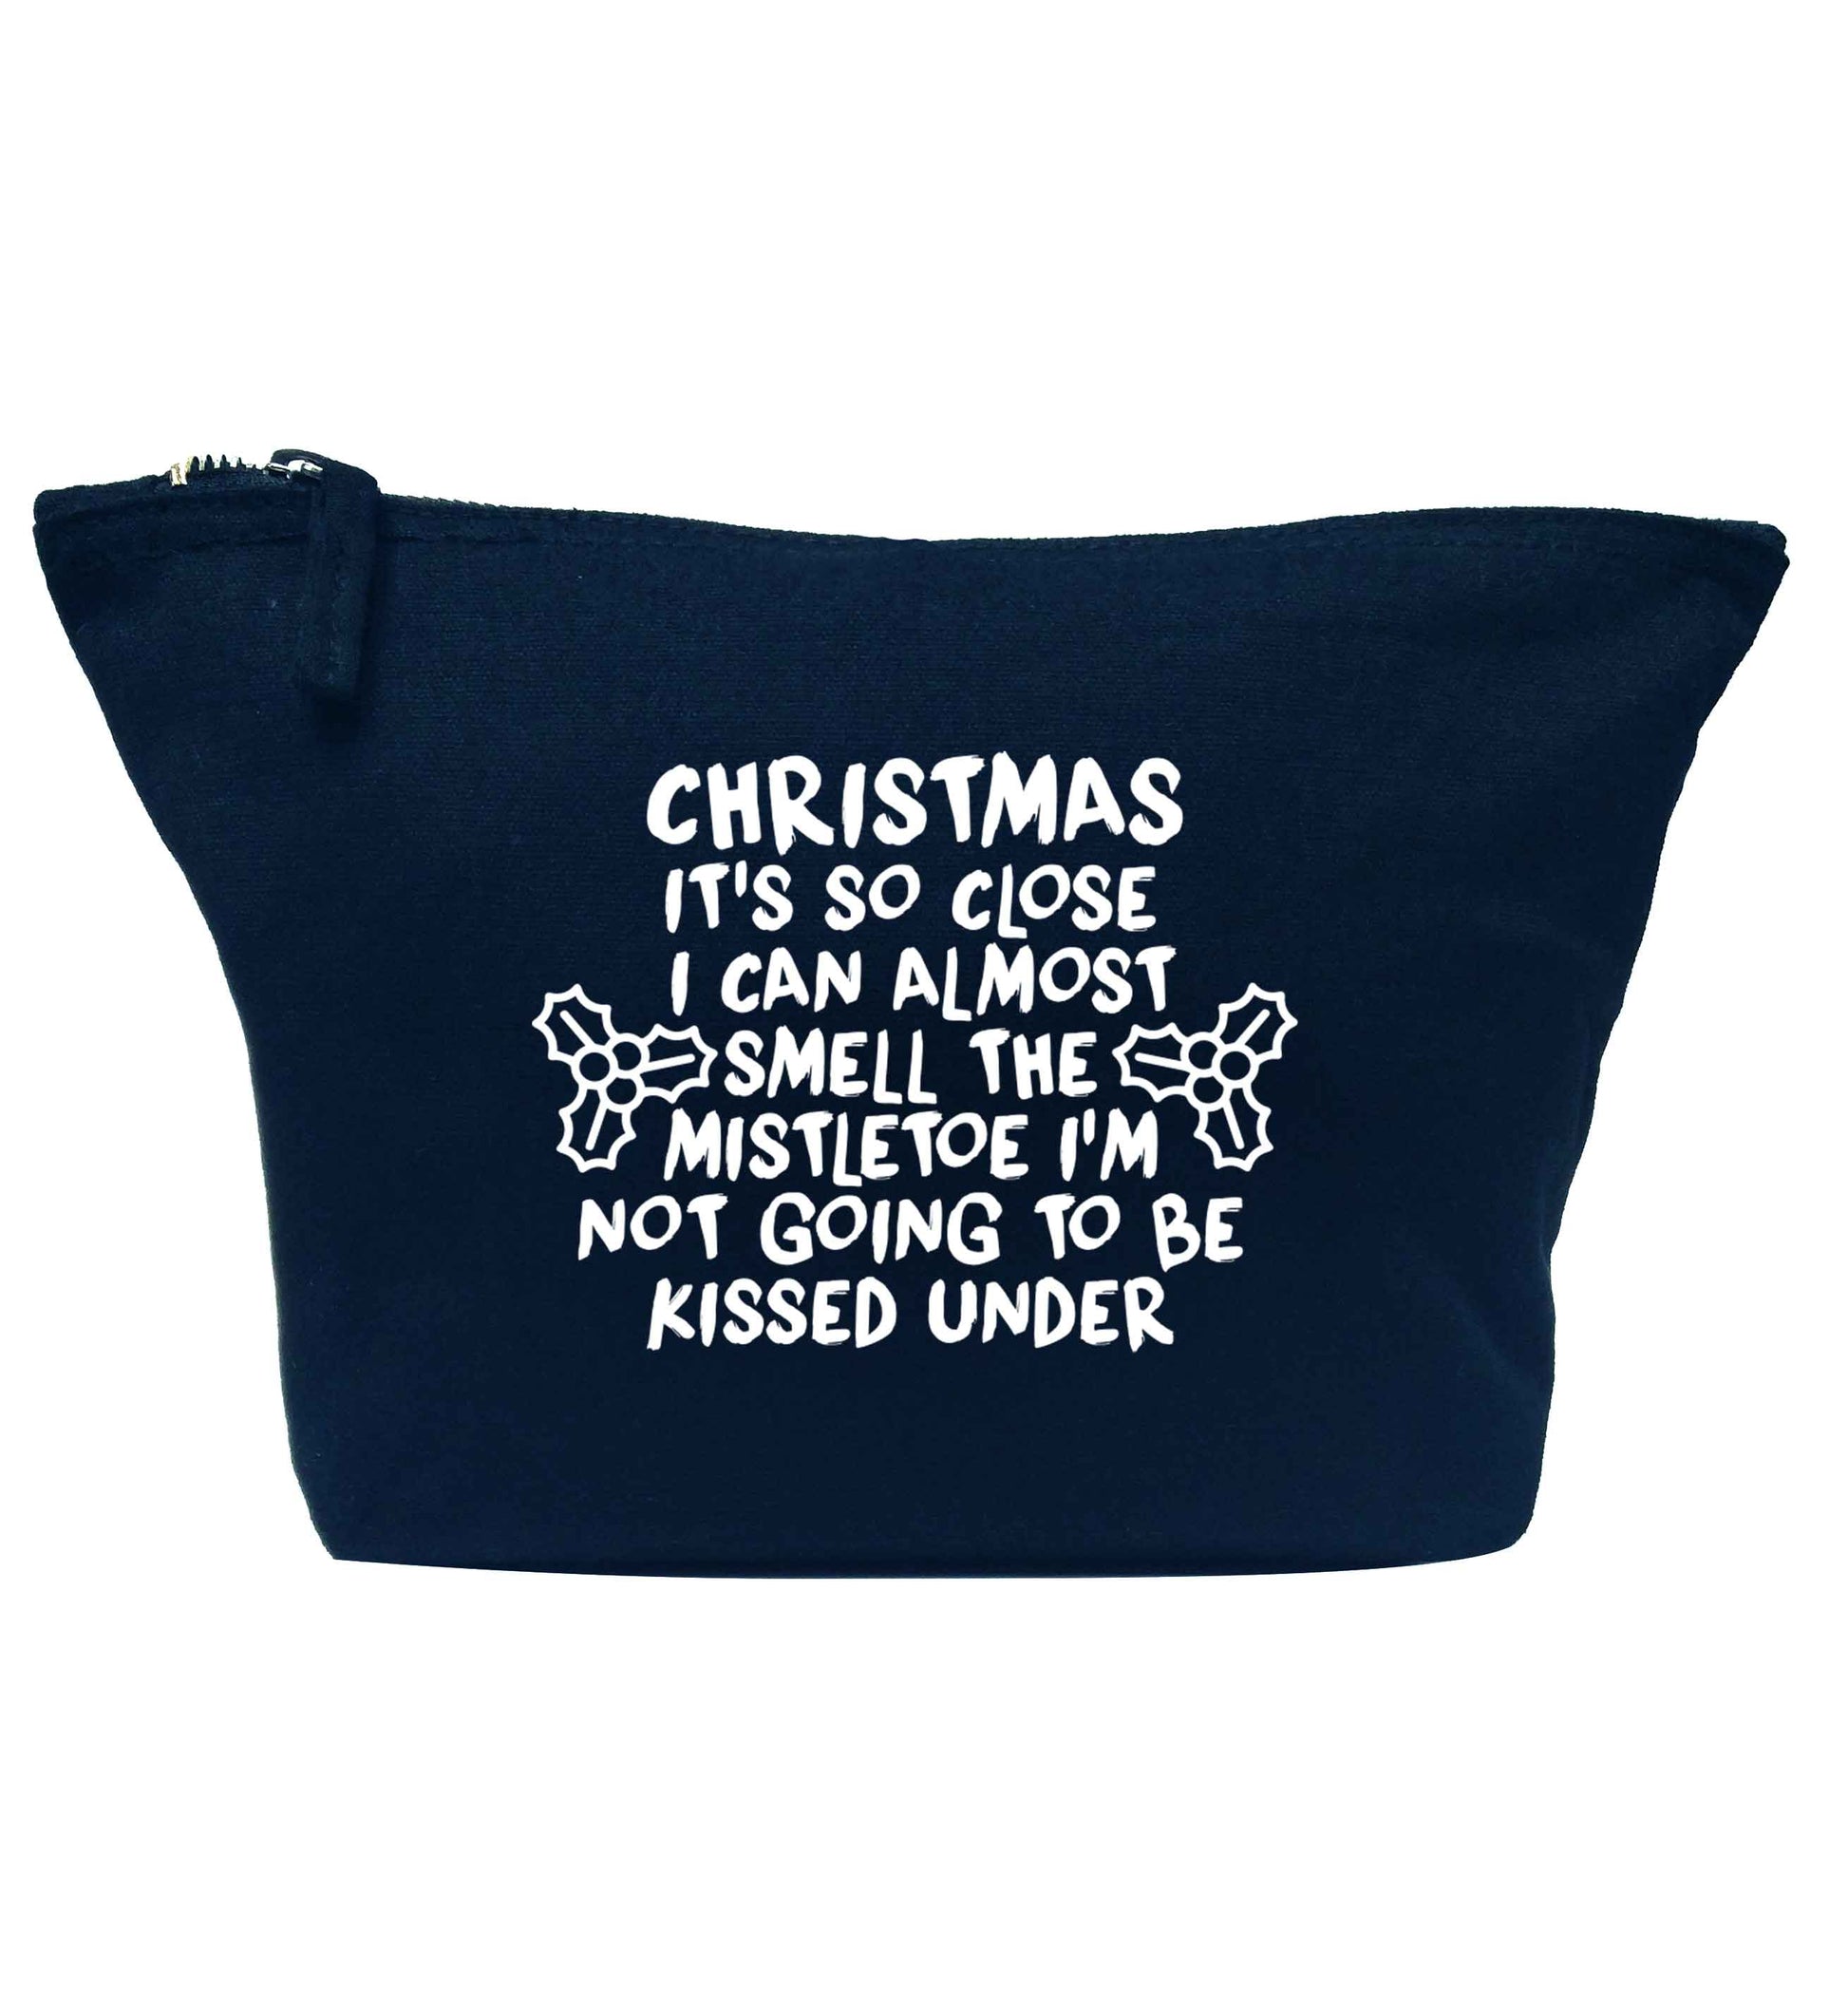 Christmas it's so close I can almost smell the misteltoe I'm not going to be kissed under navy makeup bag